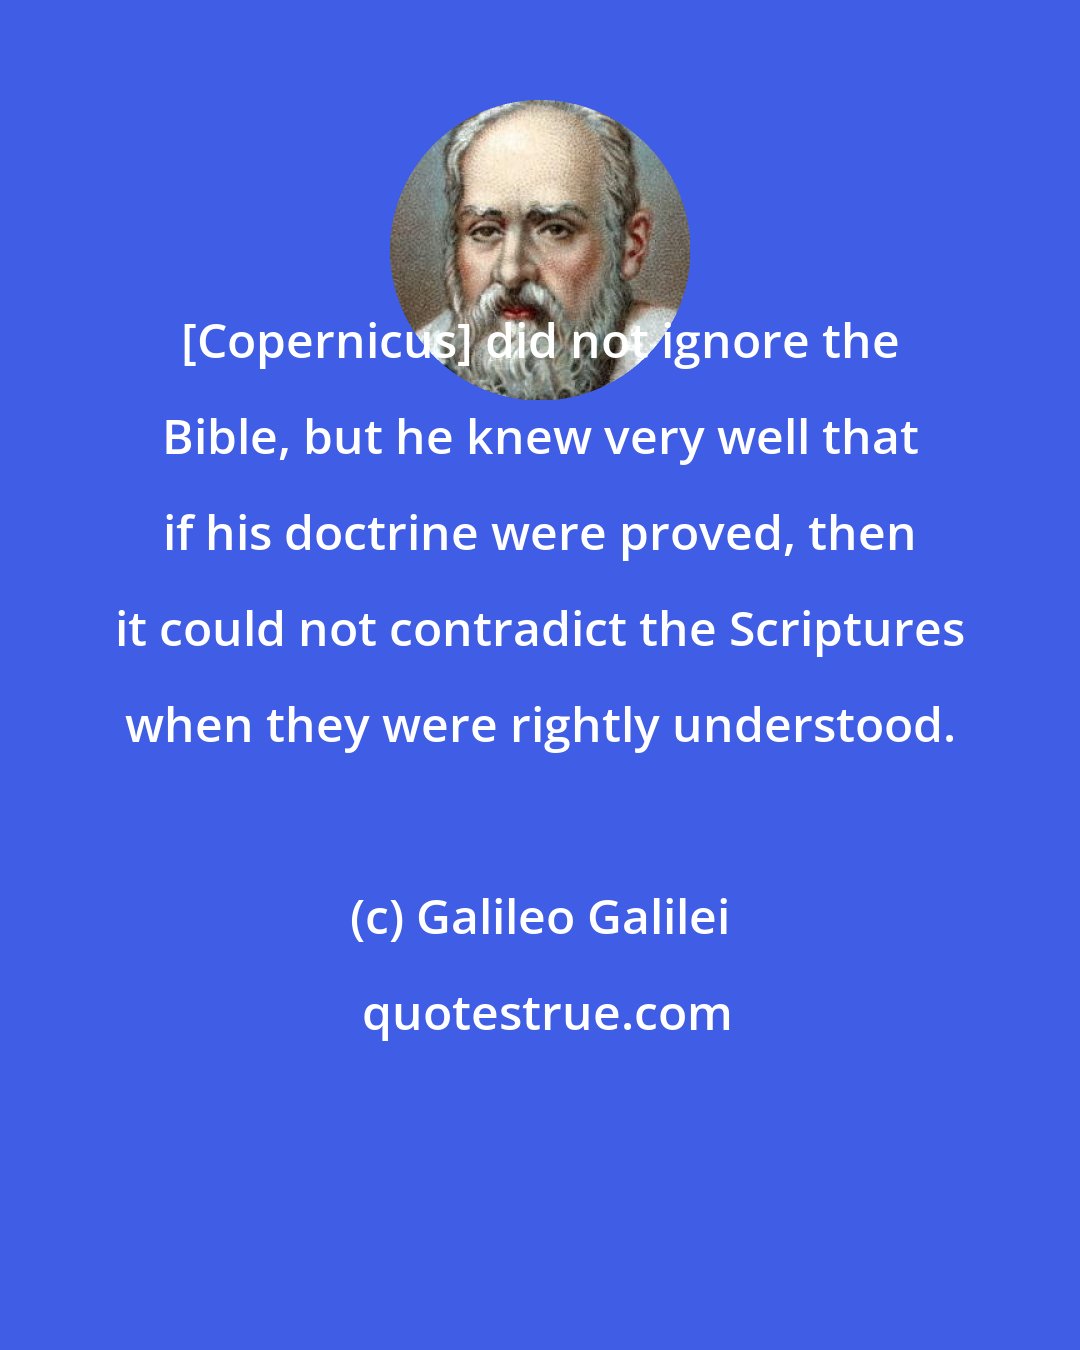 Galileo Galilei: [Copernicus] did not ignore the Bible, but he knew very well that if his doctrine were proved, then it could not contradict the Scriptures when they were rightly understood.